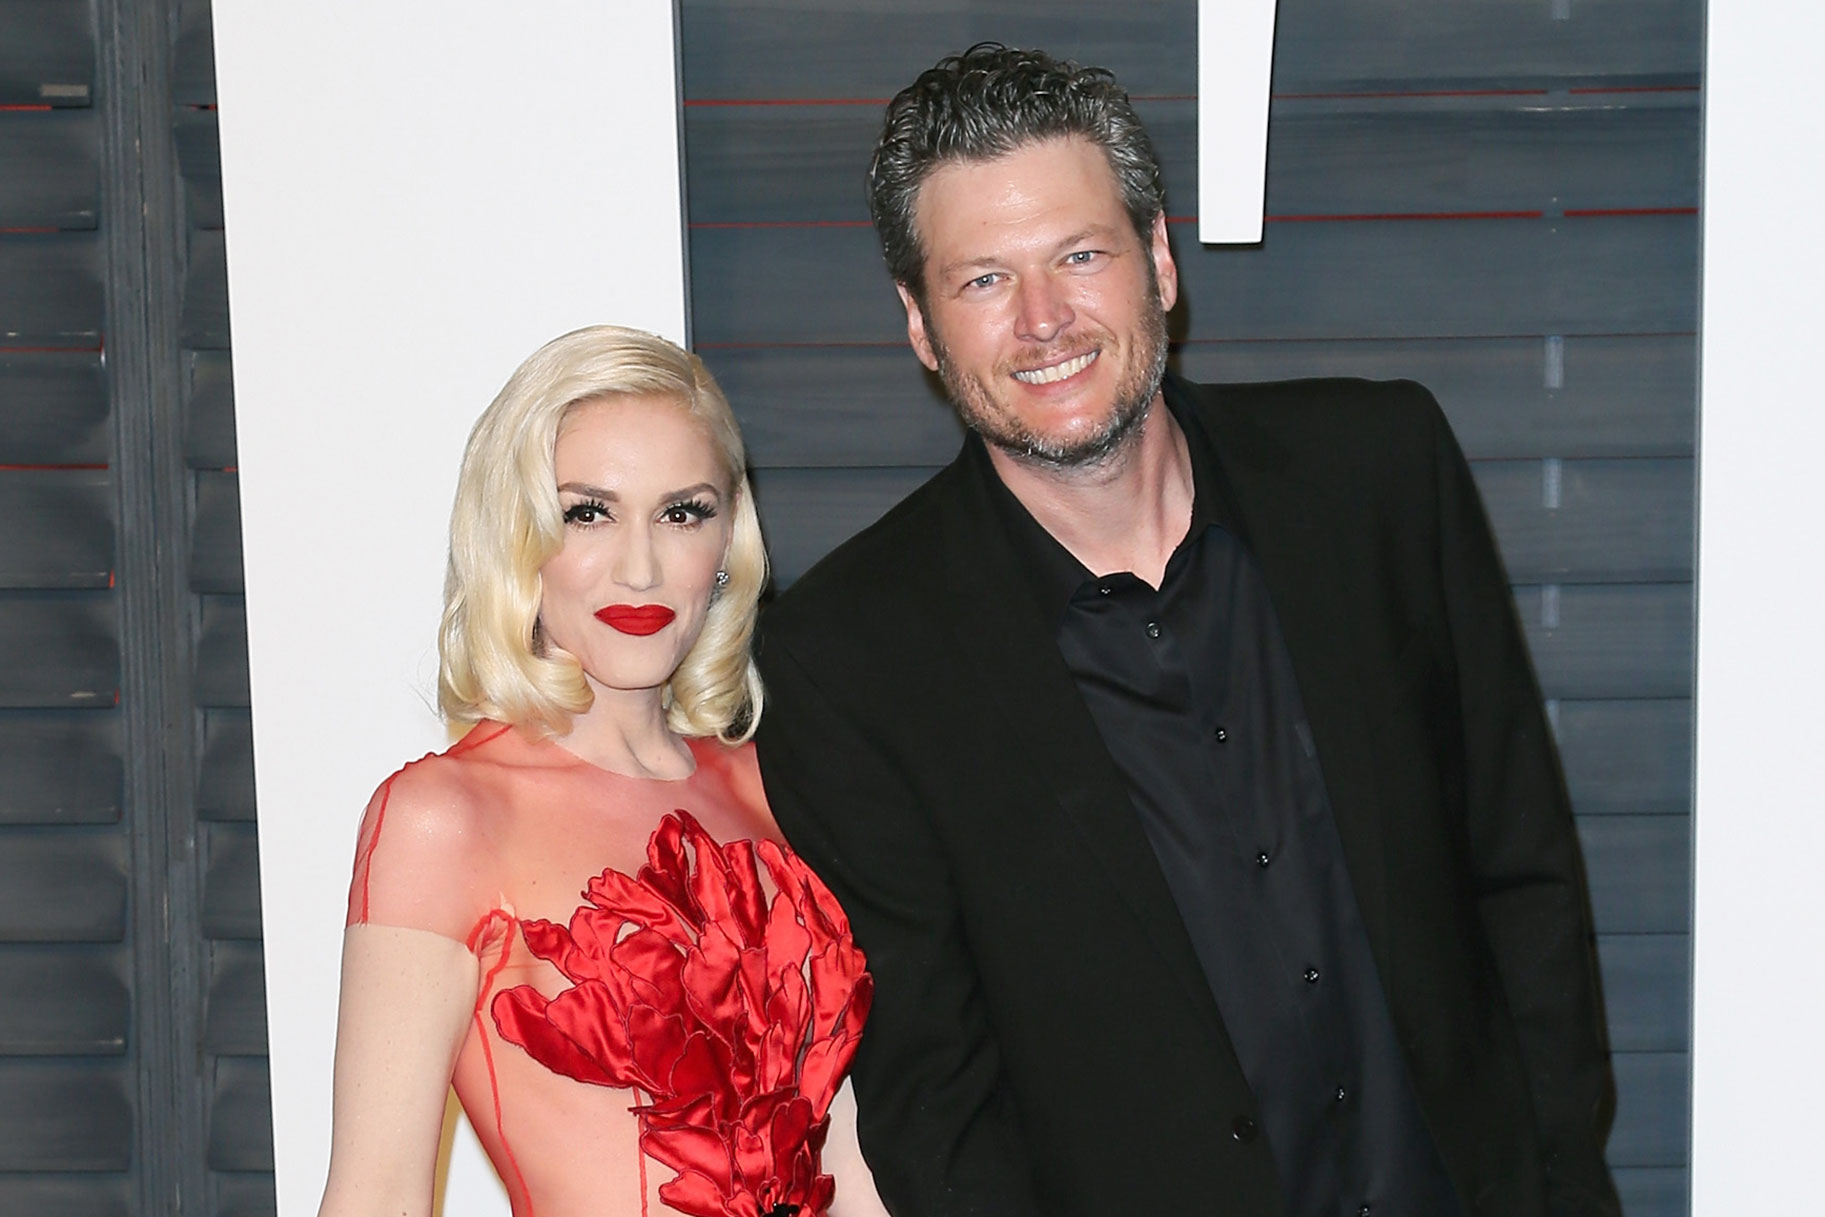 Gwen Stefani and Blake Shelton attend the 2016 Vanity Fair Oscars party